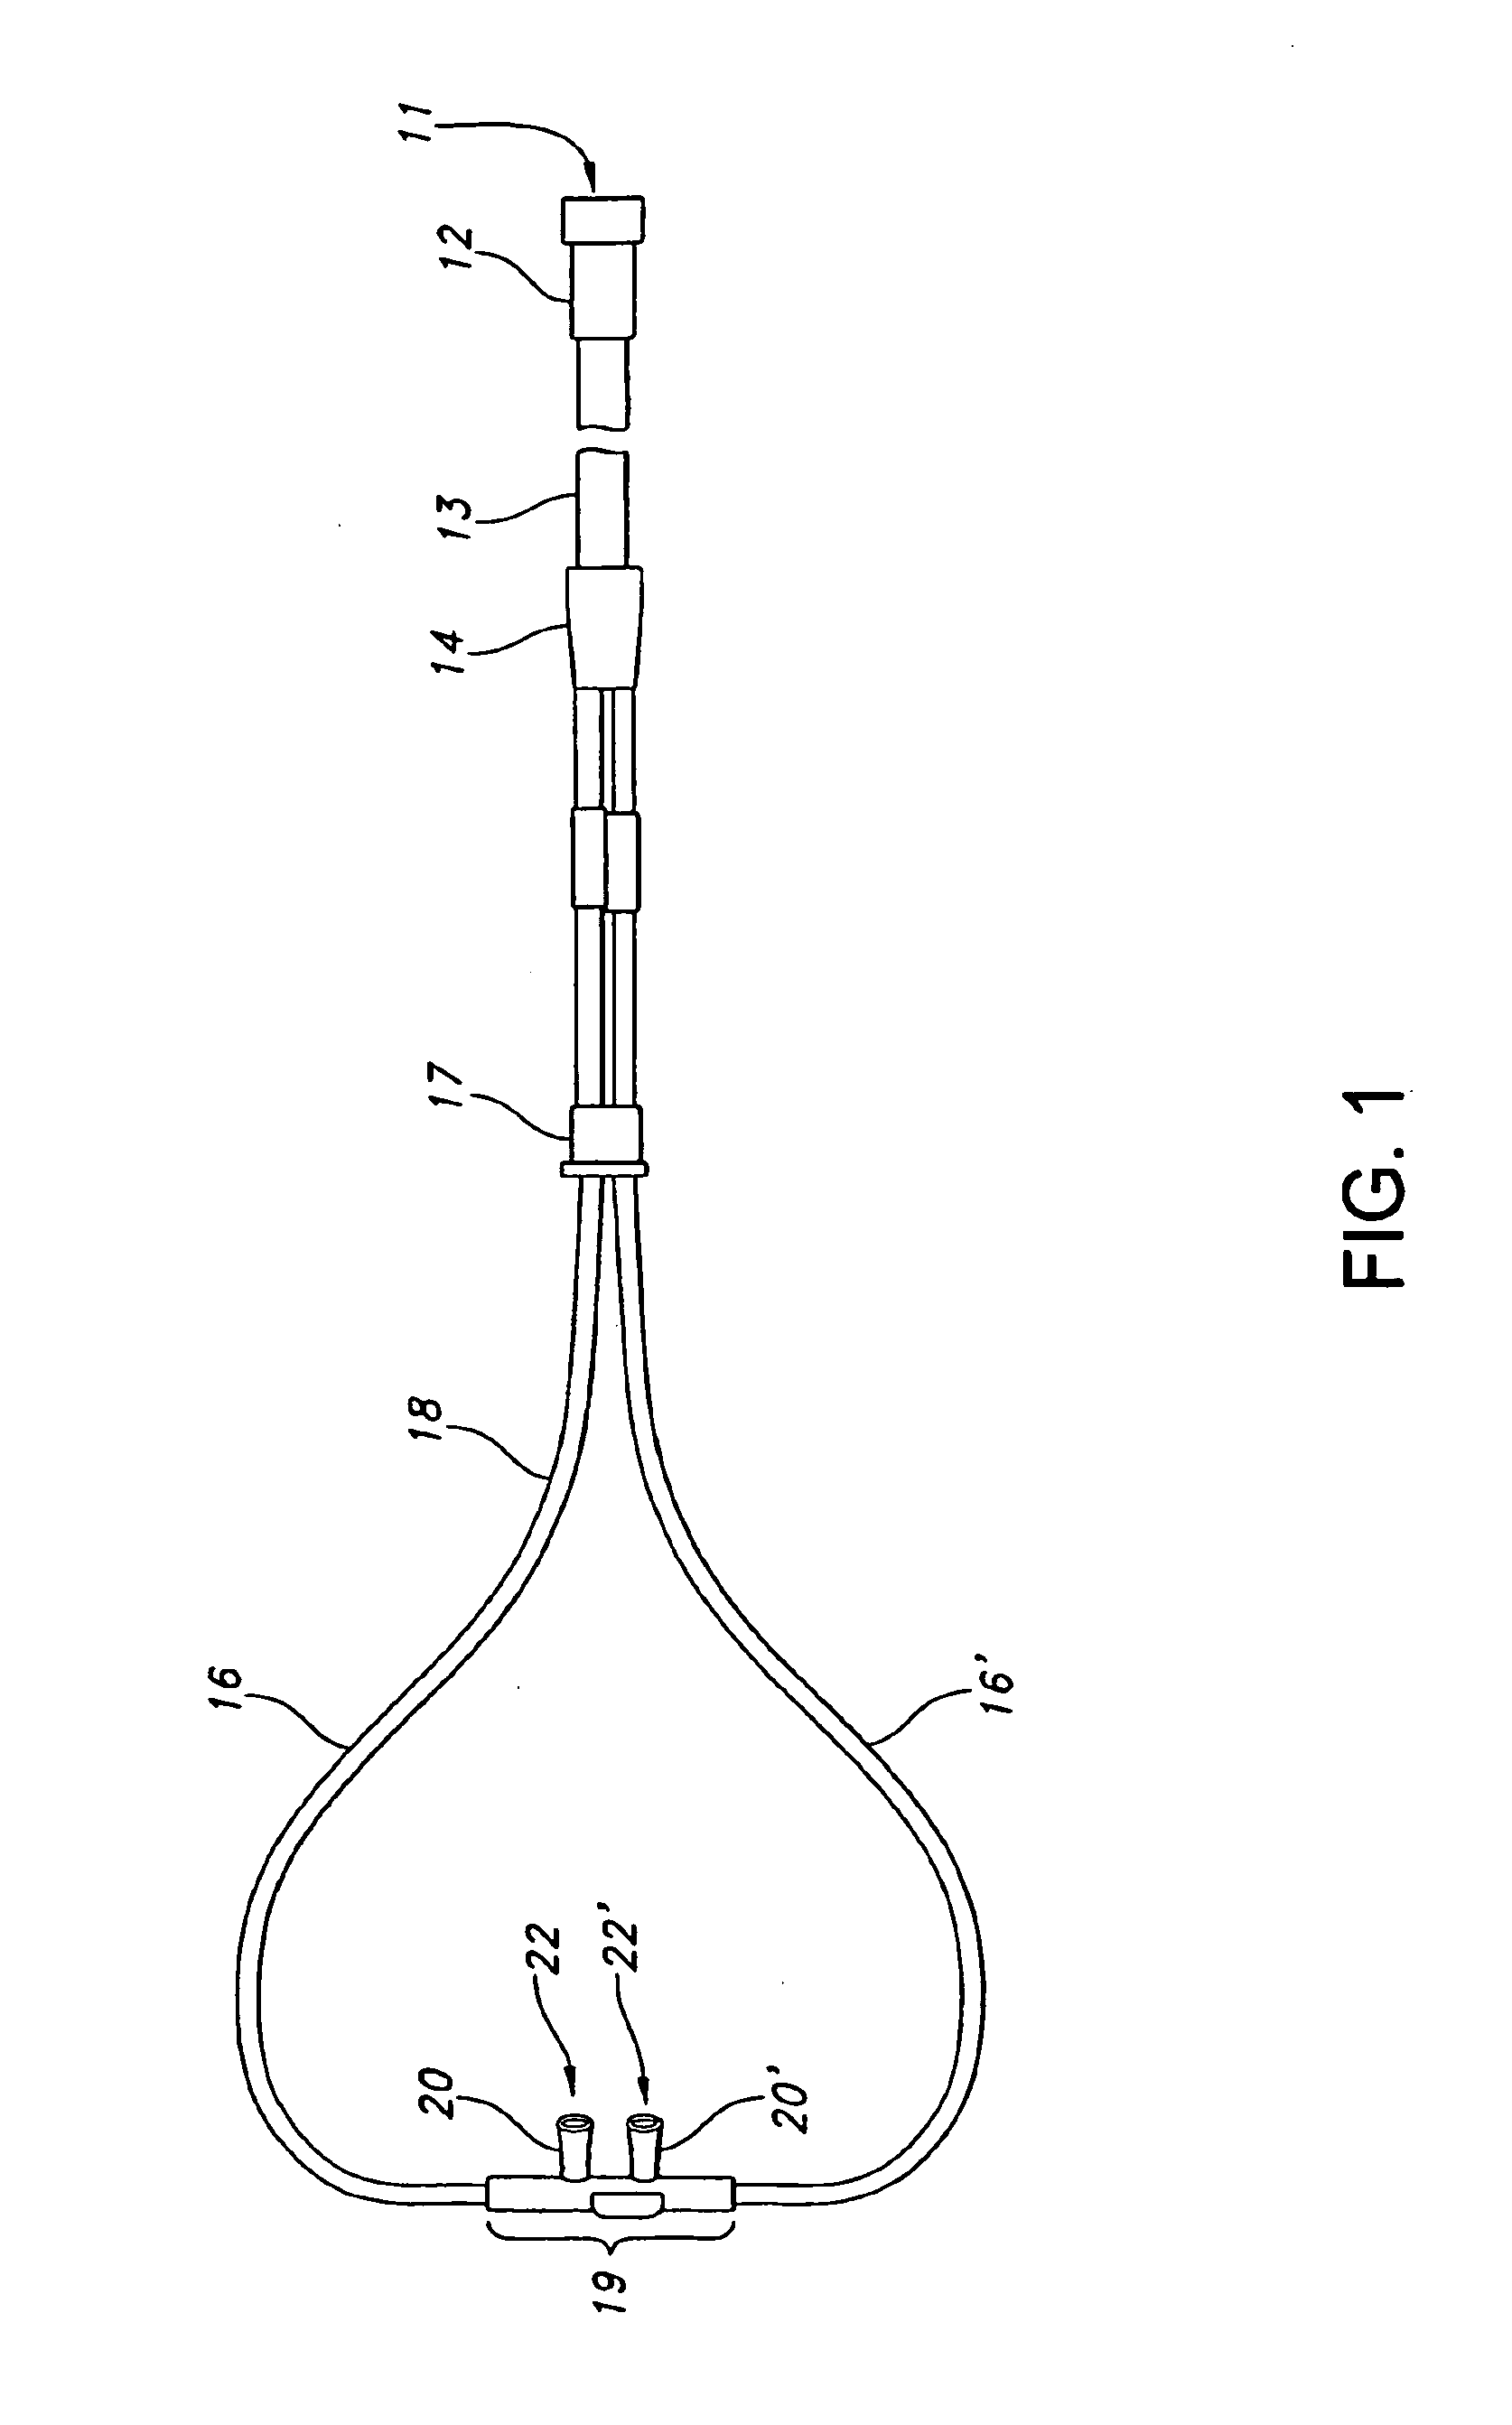 Apparatus configured to reduce microbial infection and method of making the same